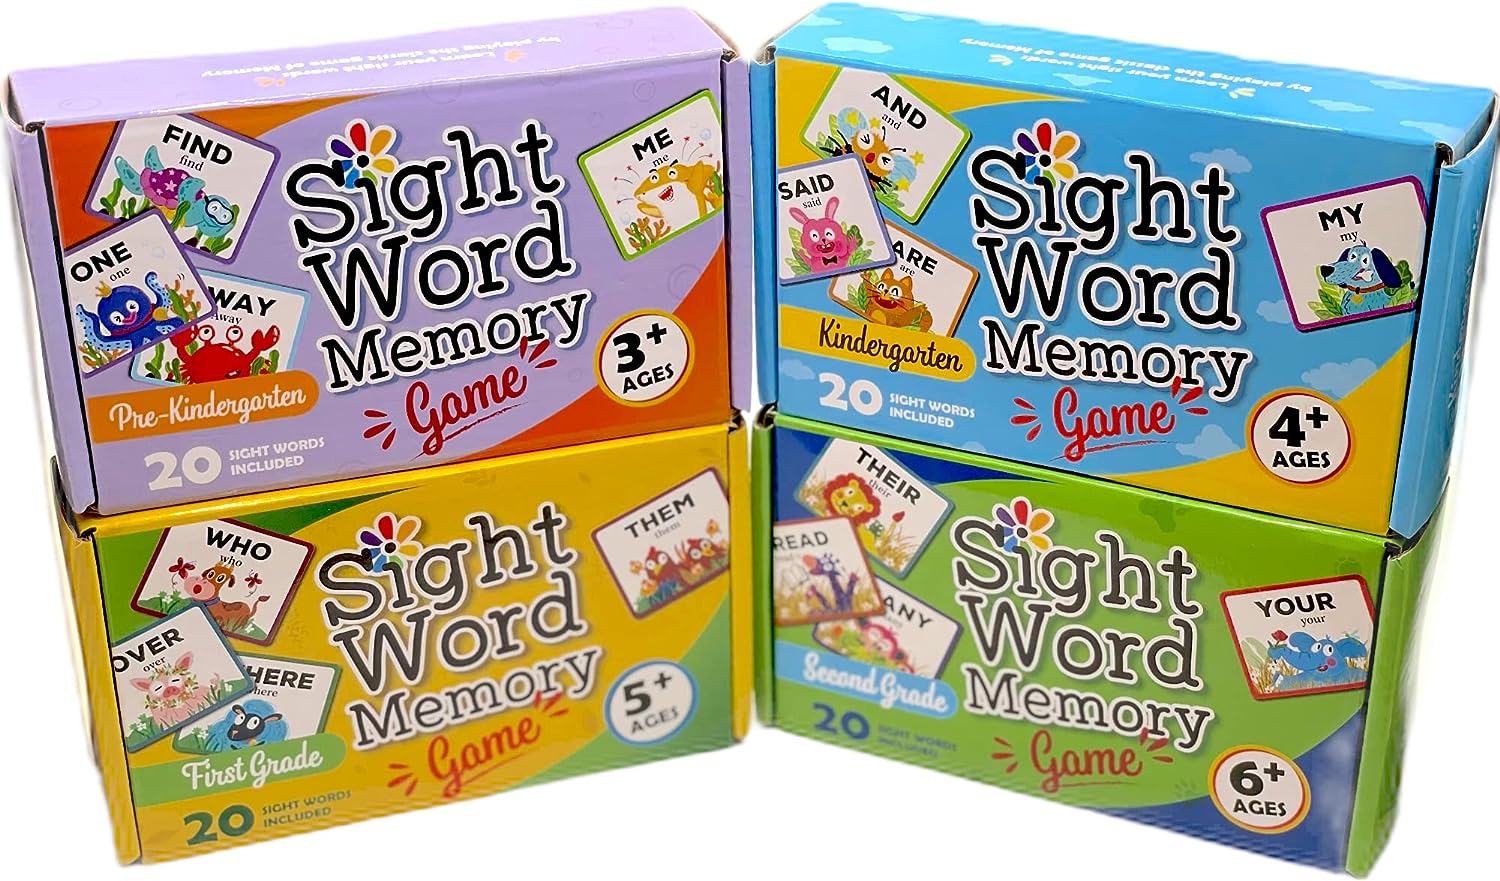 Urban Supply Co Sight Word Memory Game Review: A Fun and Educational Way to Enhance Language Skills